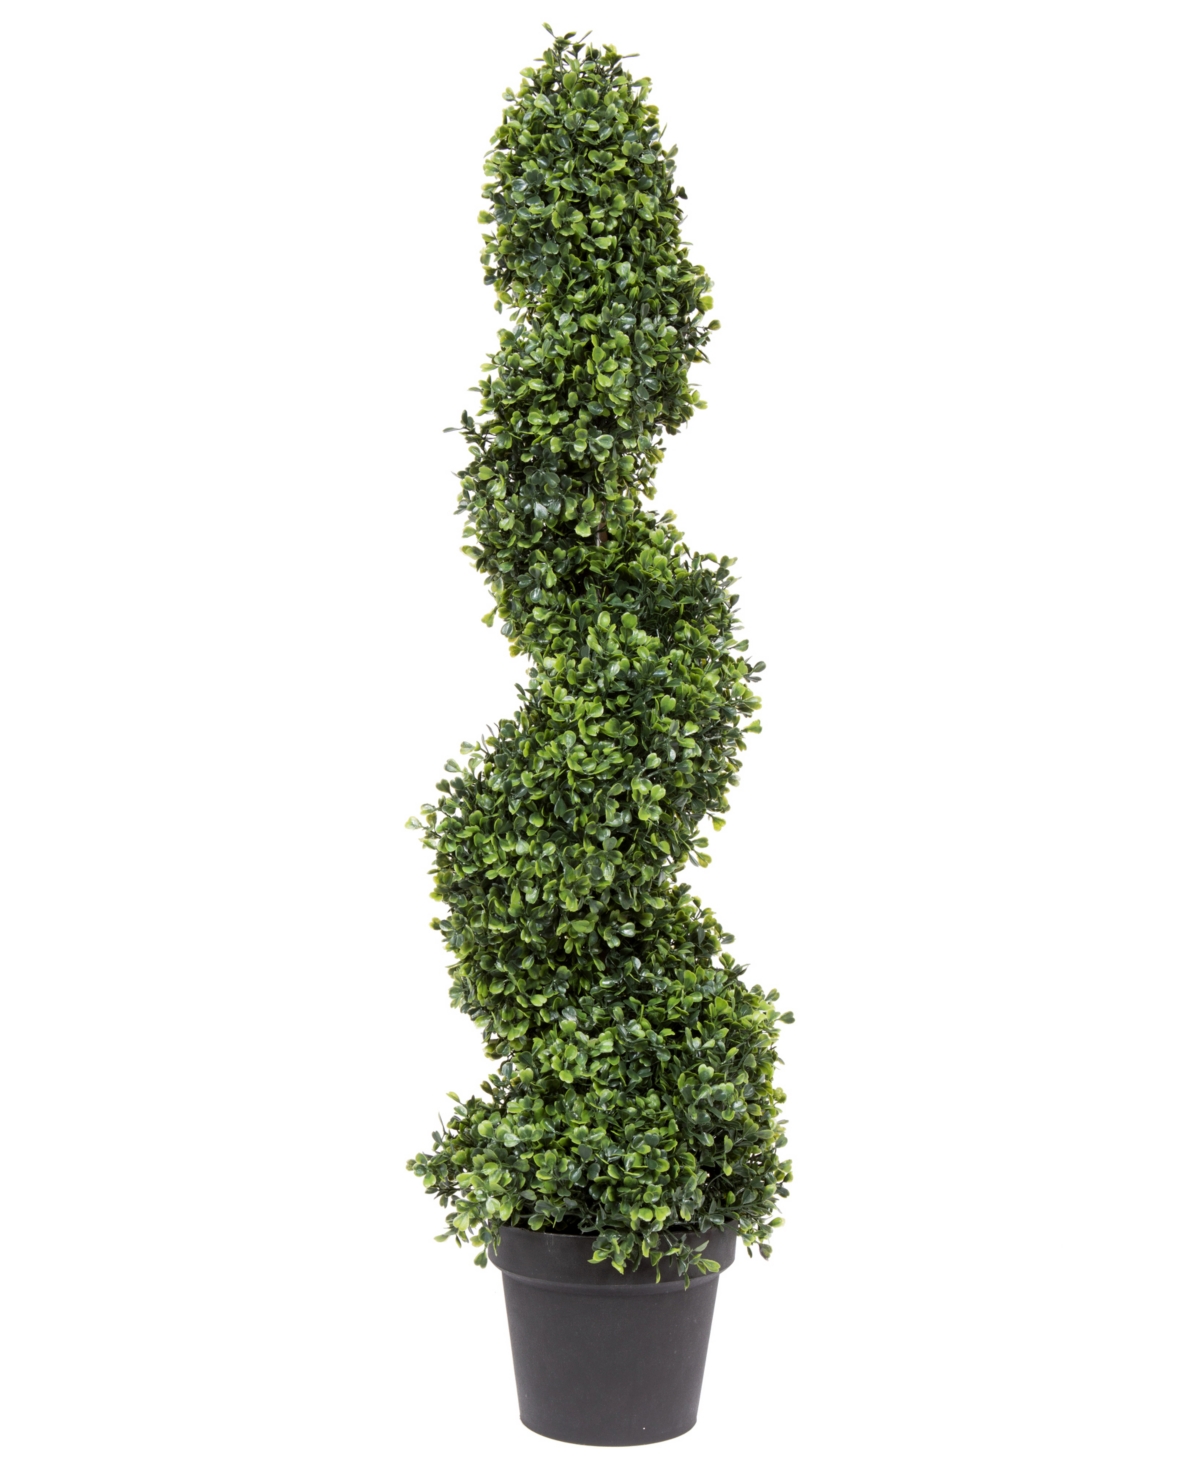 3' Artificial Potted Green Boxwood Spiral Tree